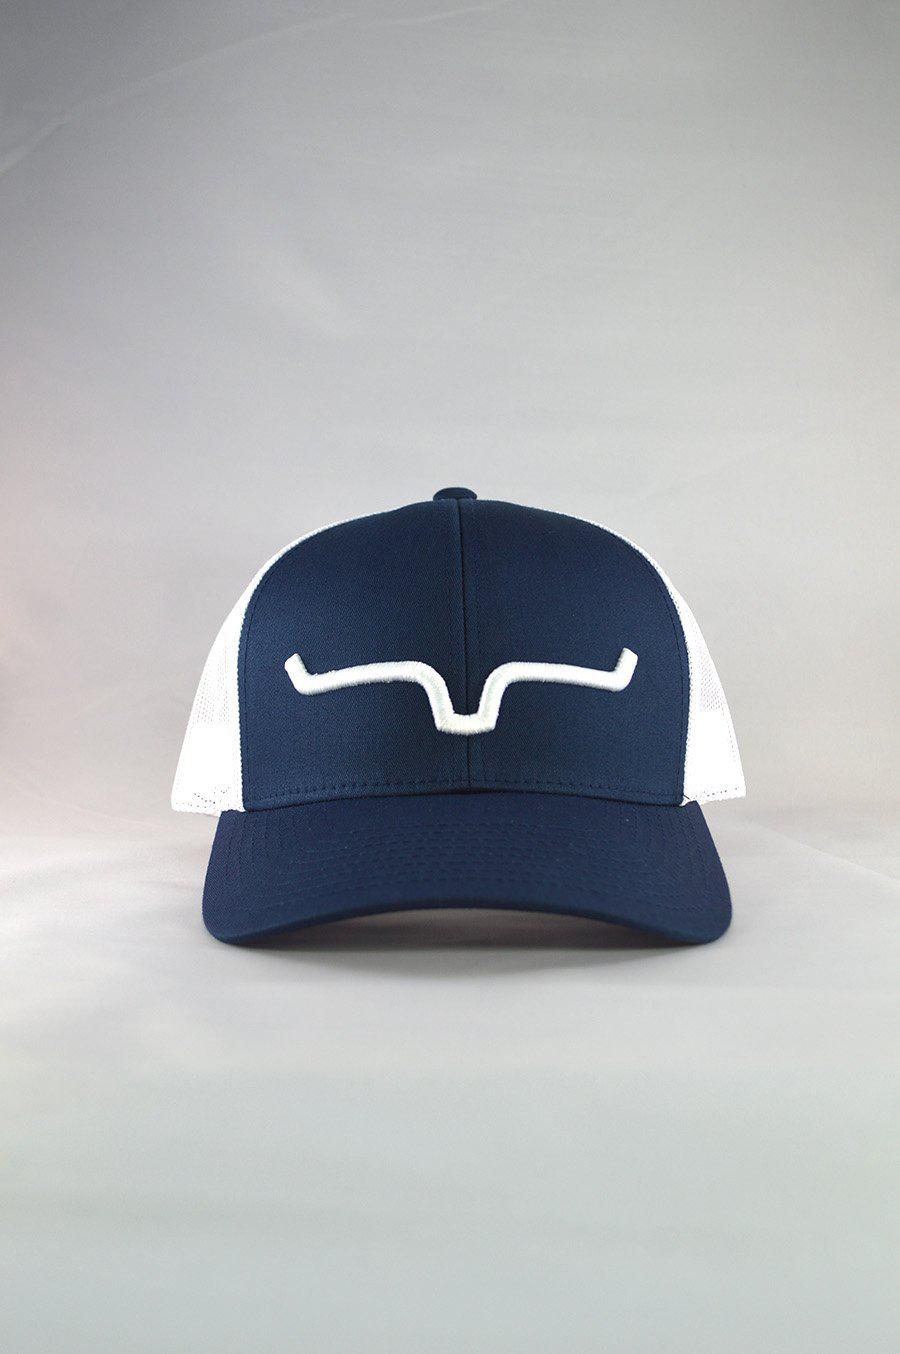 Kimes Ranch Weekly Trucker Navy/White - West 20 Saddle Co.